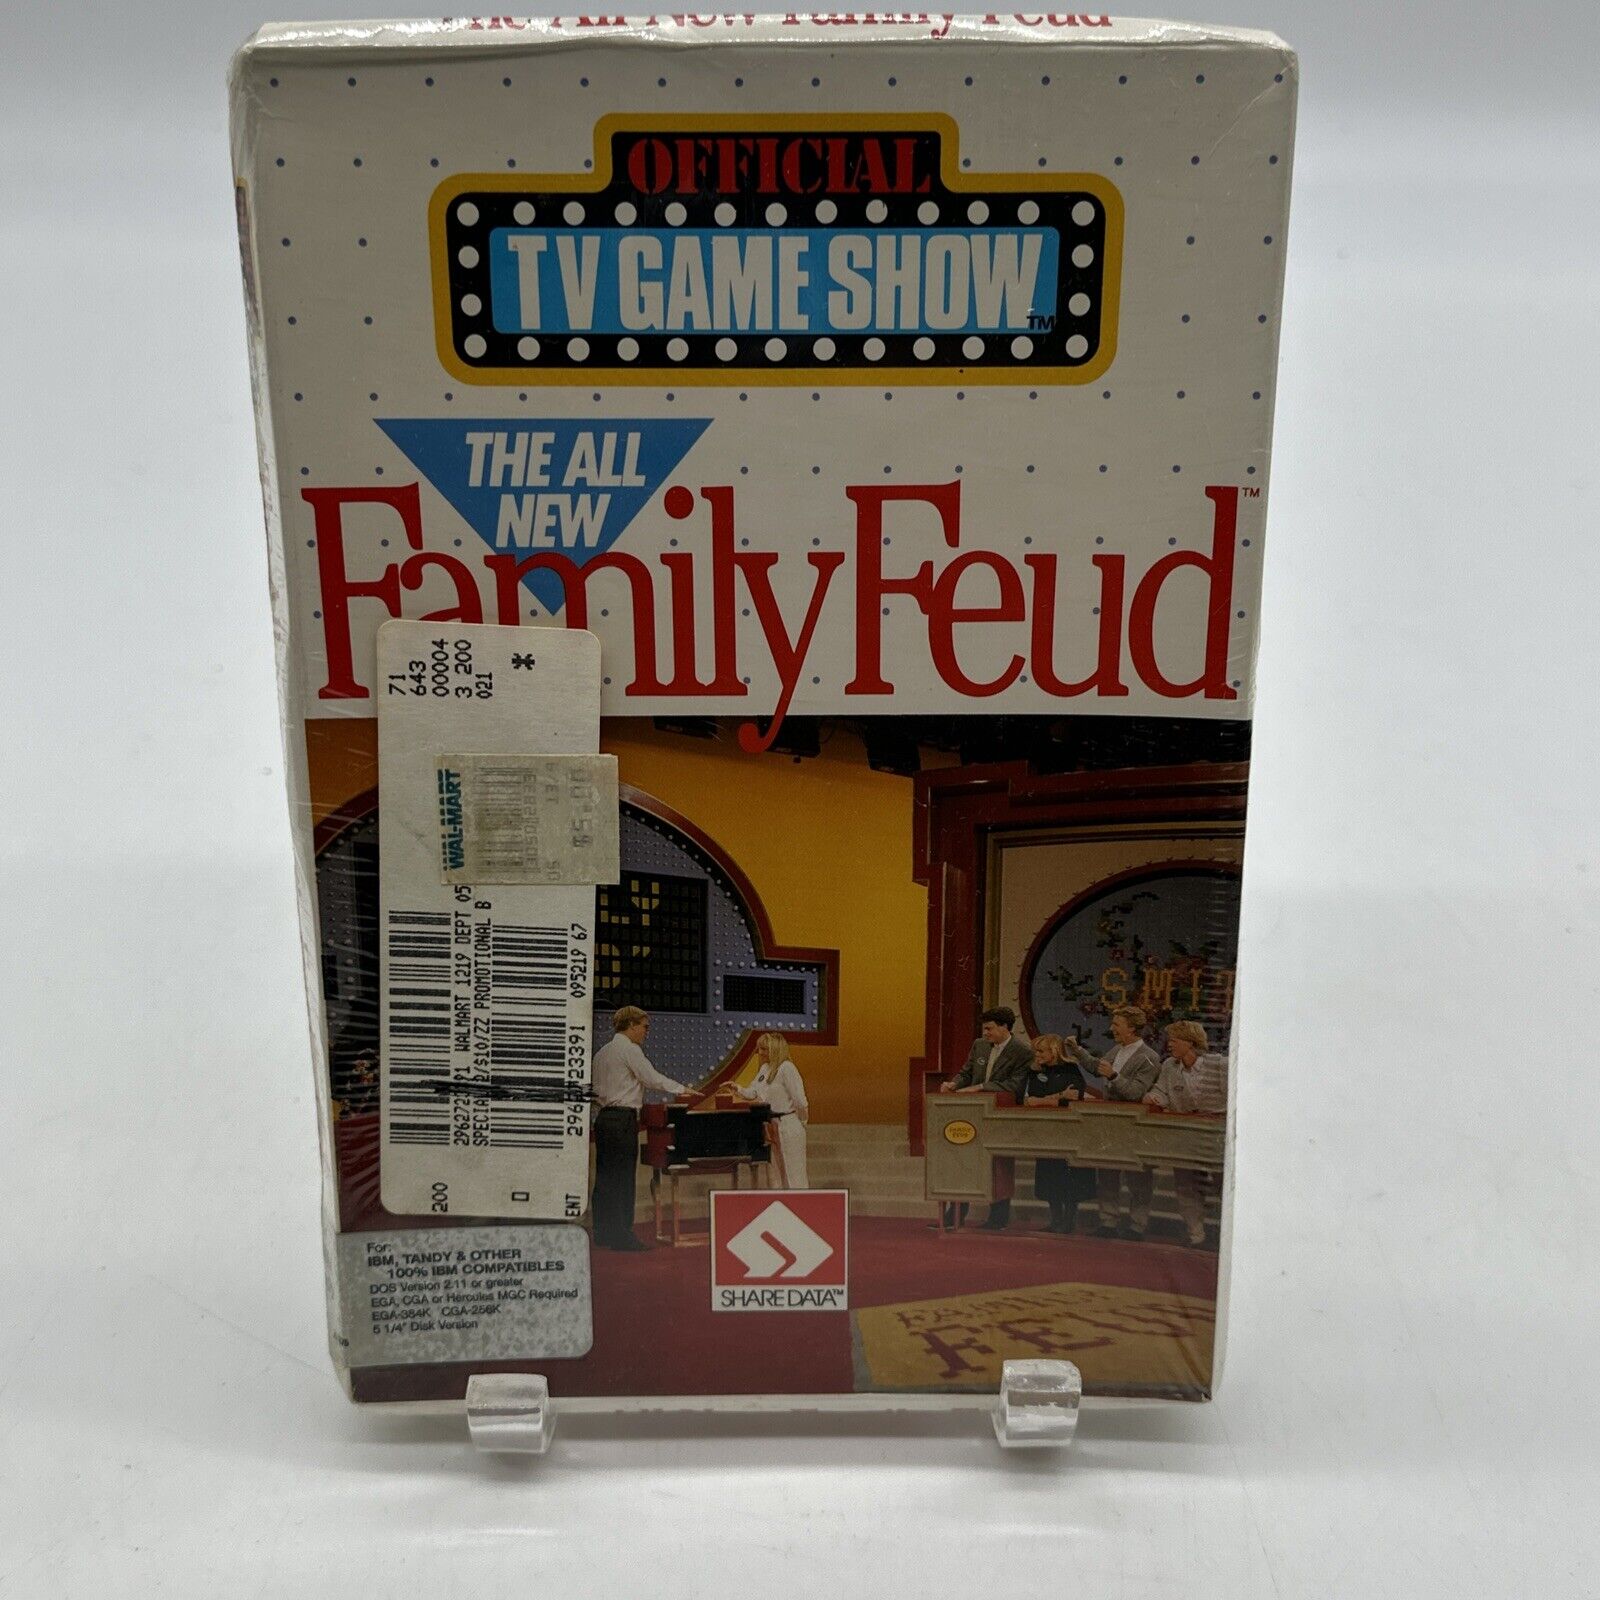 Sealed NOS The All New Family Feud PC Vintage Game. Rare